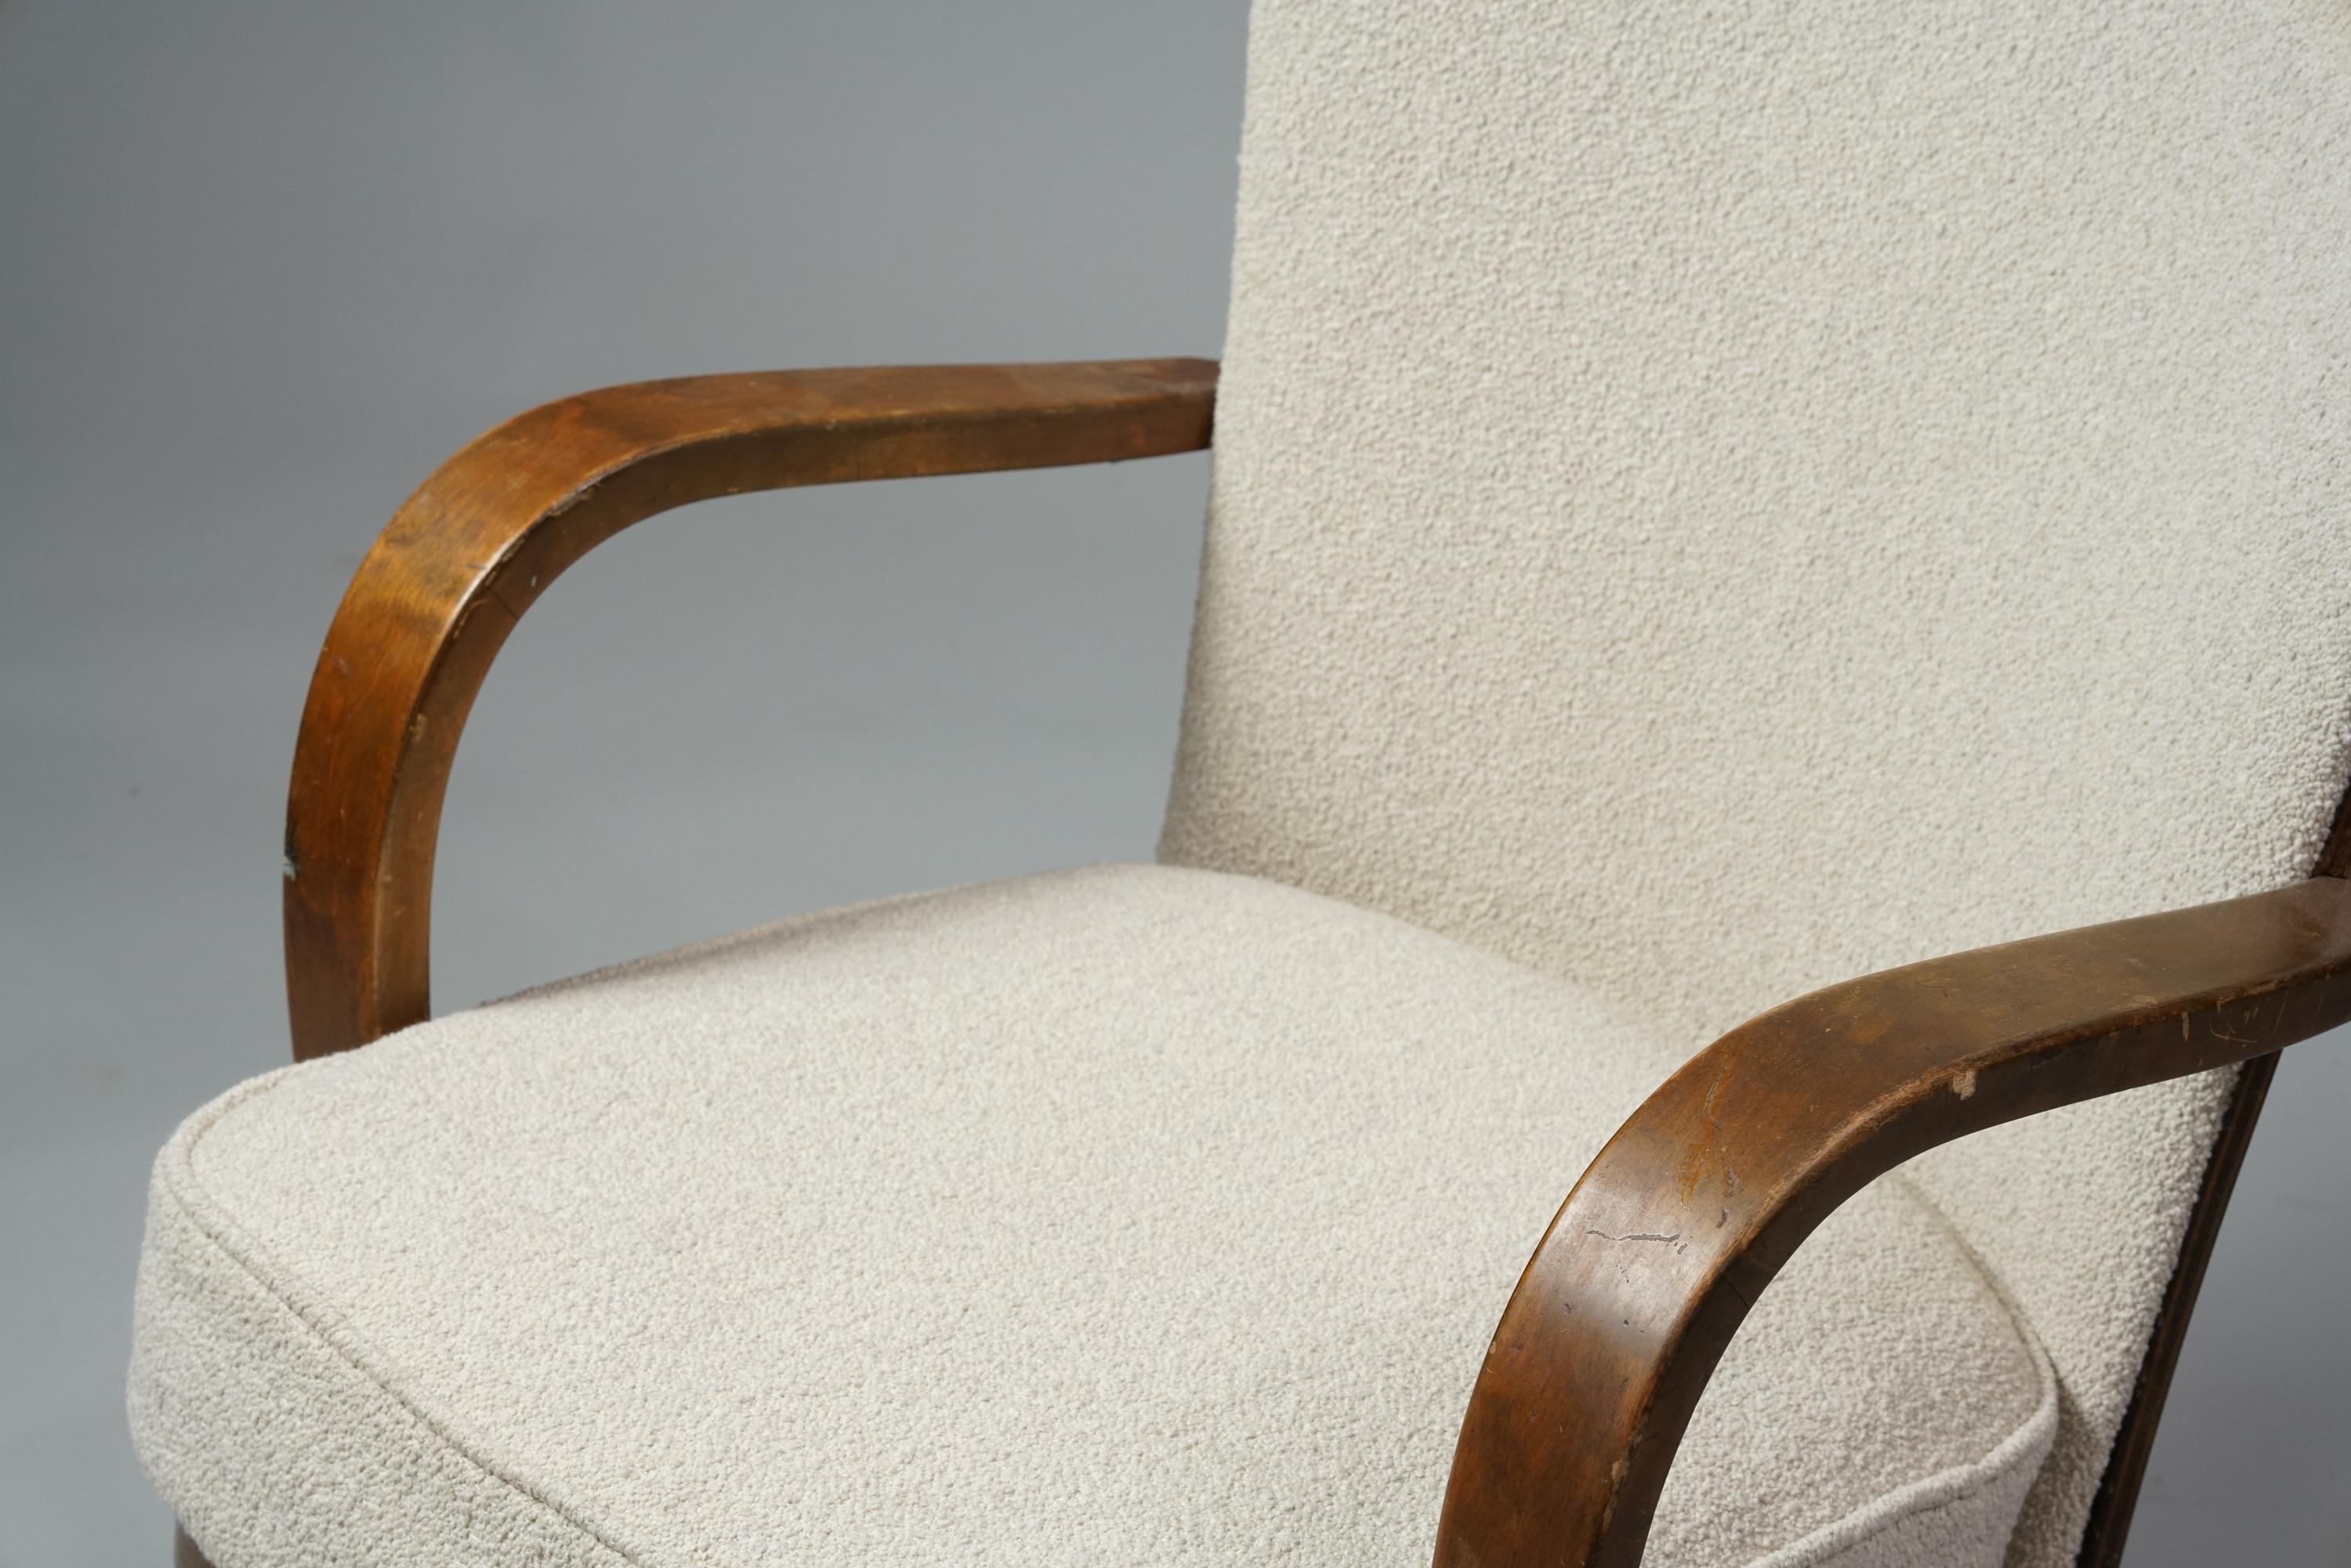 Armchair, designed by Werner West, 1930/1940s. Birch frame, reupholstered with quality Lauritzon's Orsetto 012- fabric. Good vintage condition, minor patina and wear on the frame consistent with age and use. Classic Finnish Scandinavian Modern